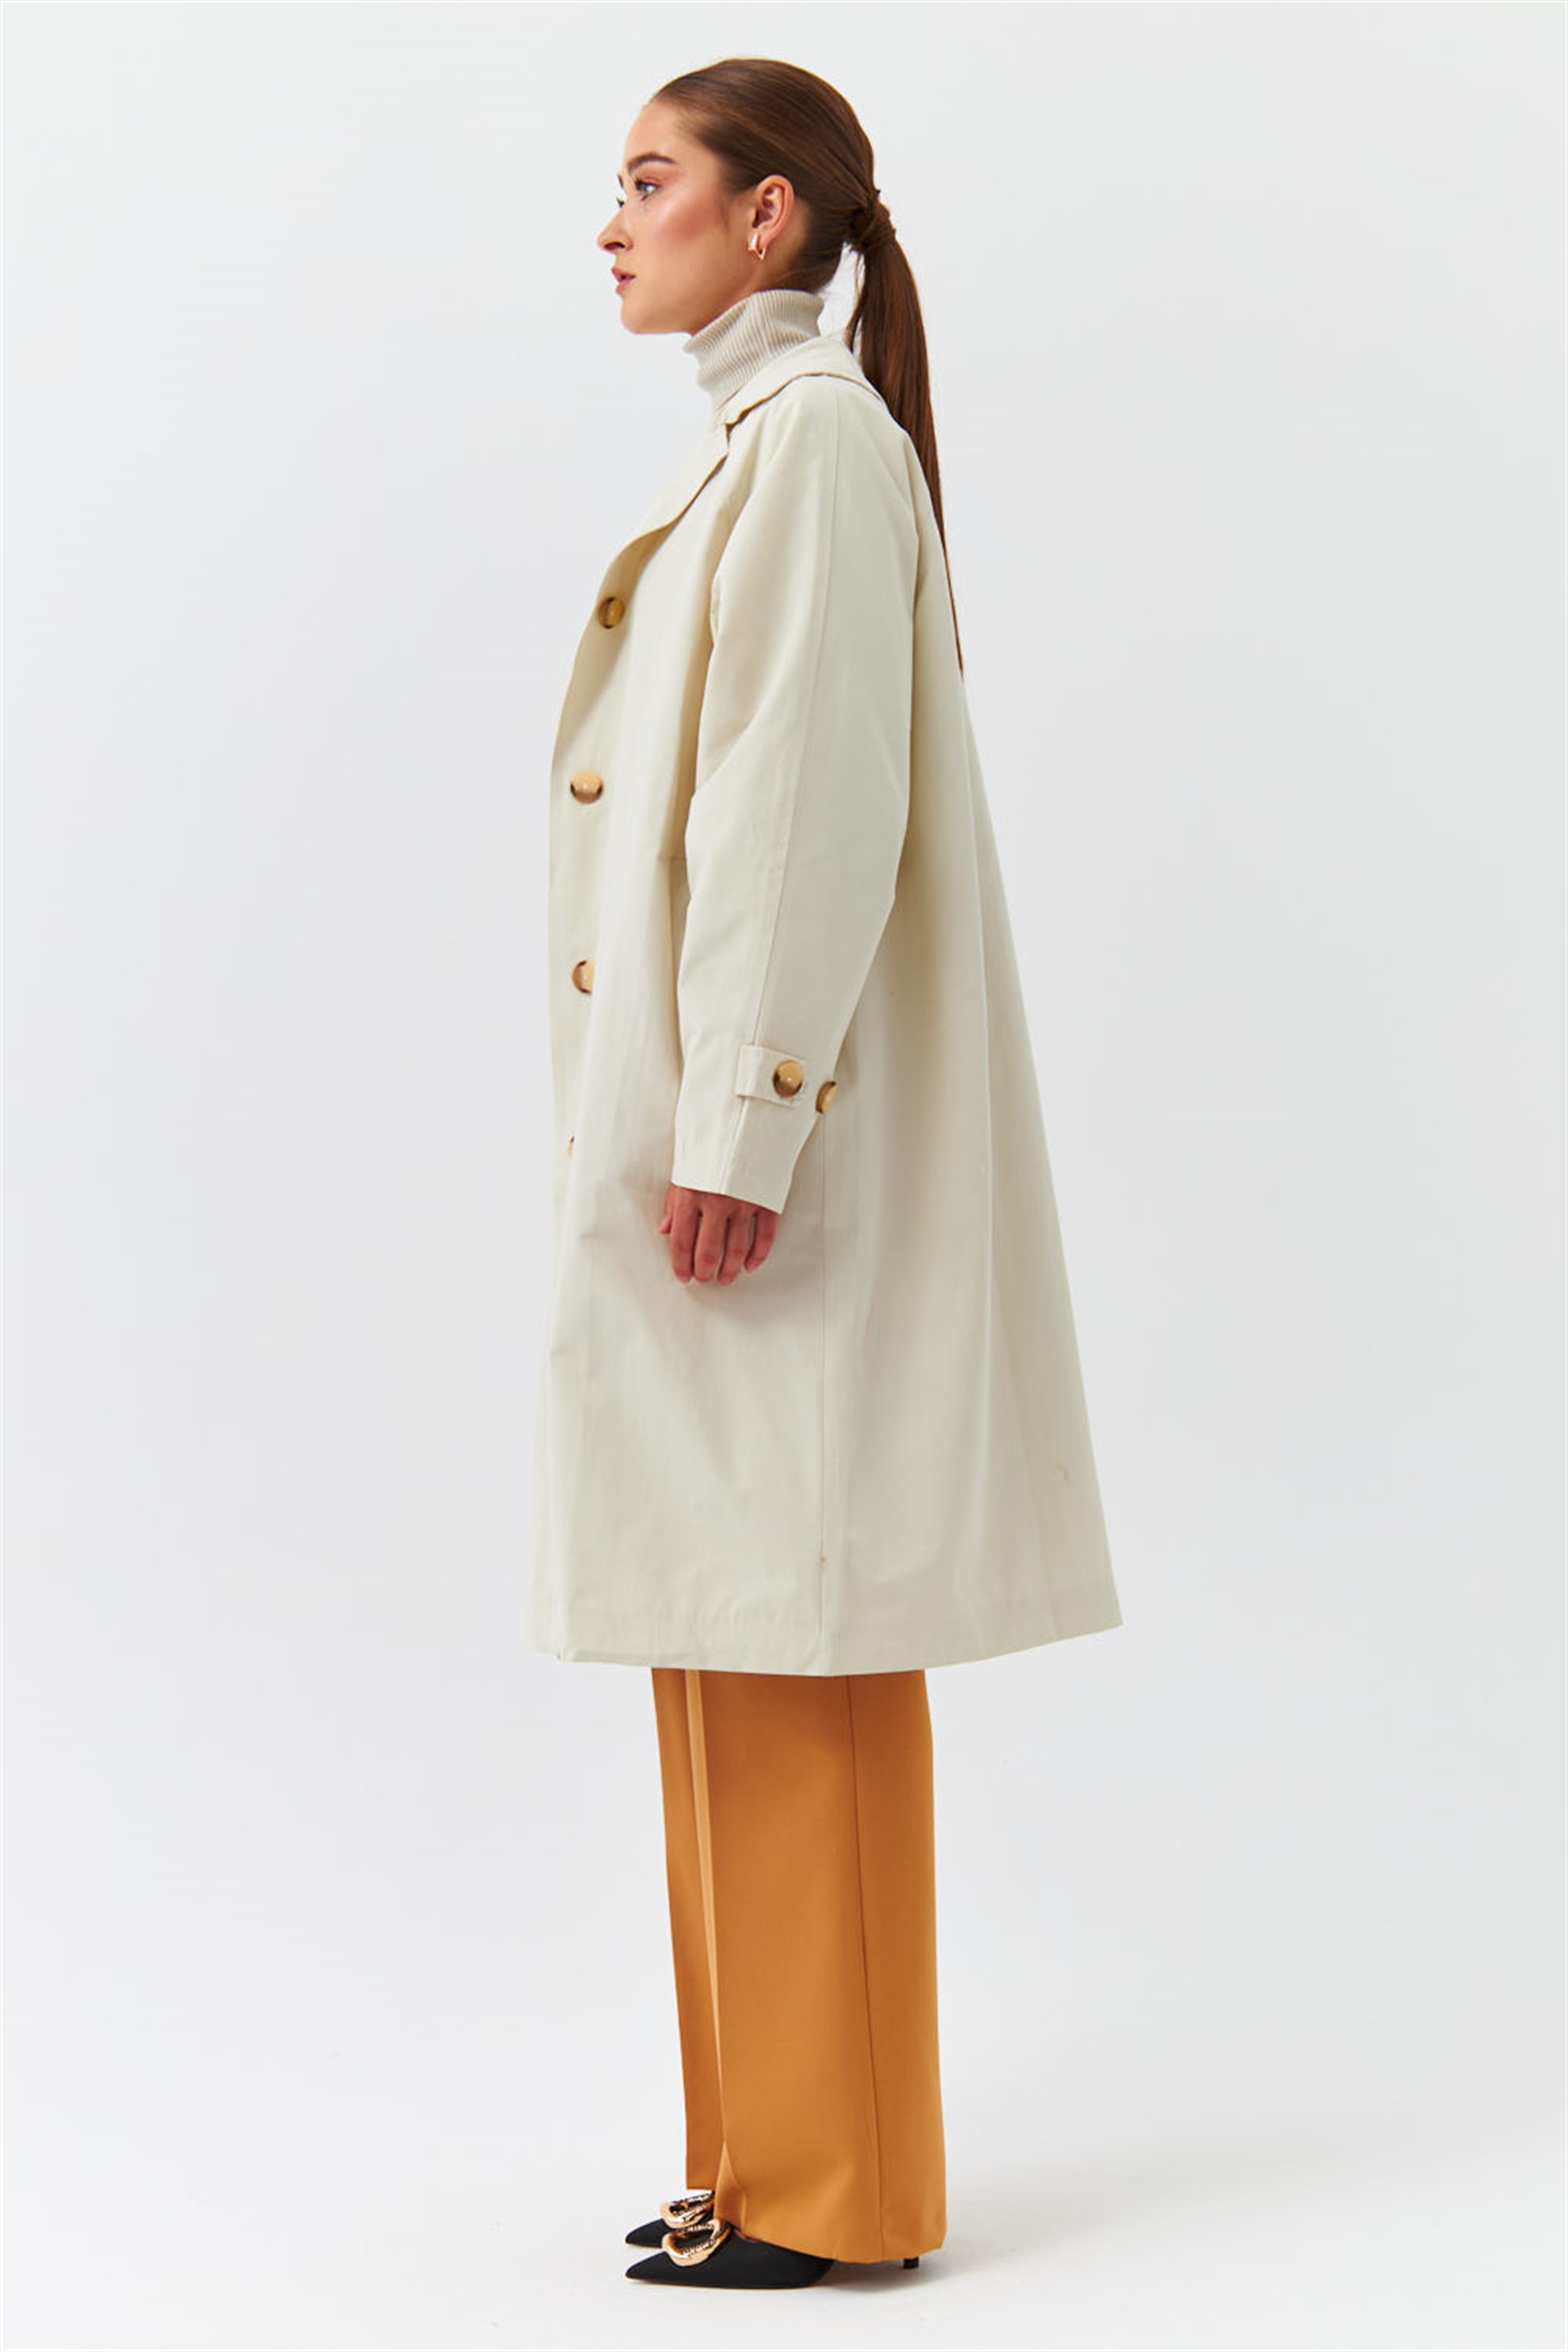 Midi Length Cream Women's Trench Coat With Modest Buttons